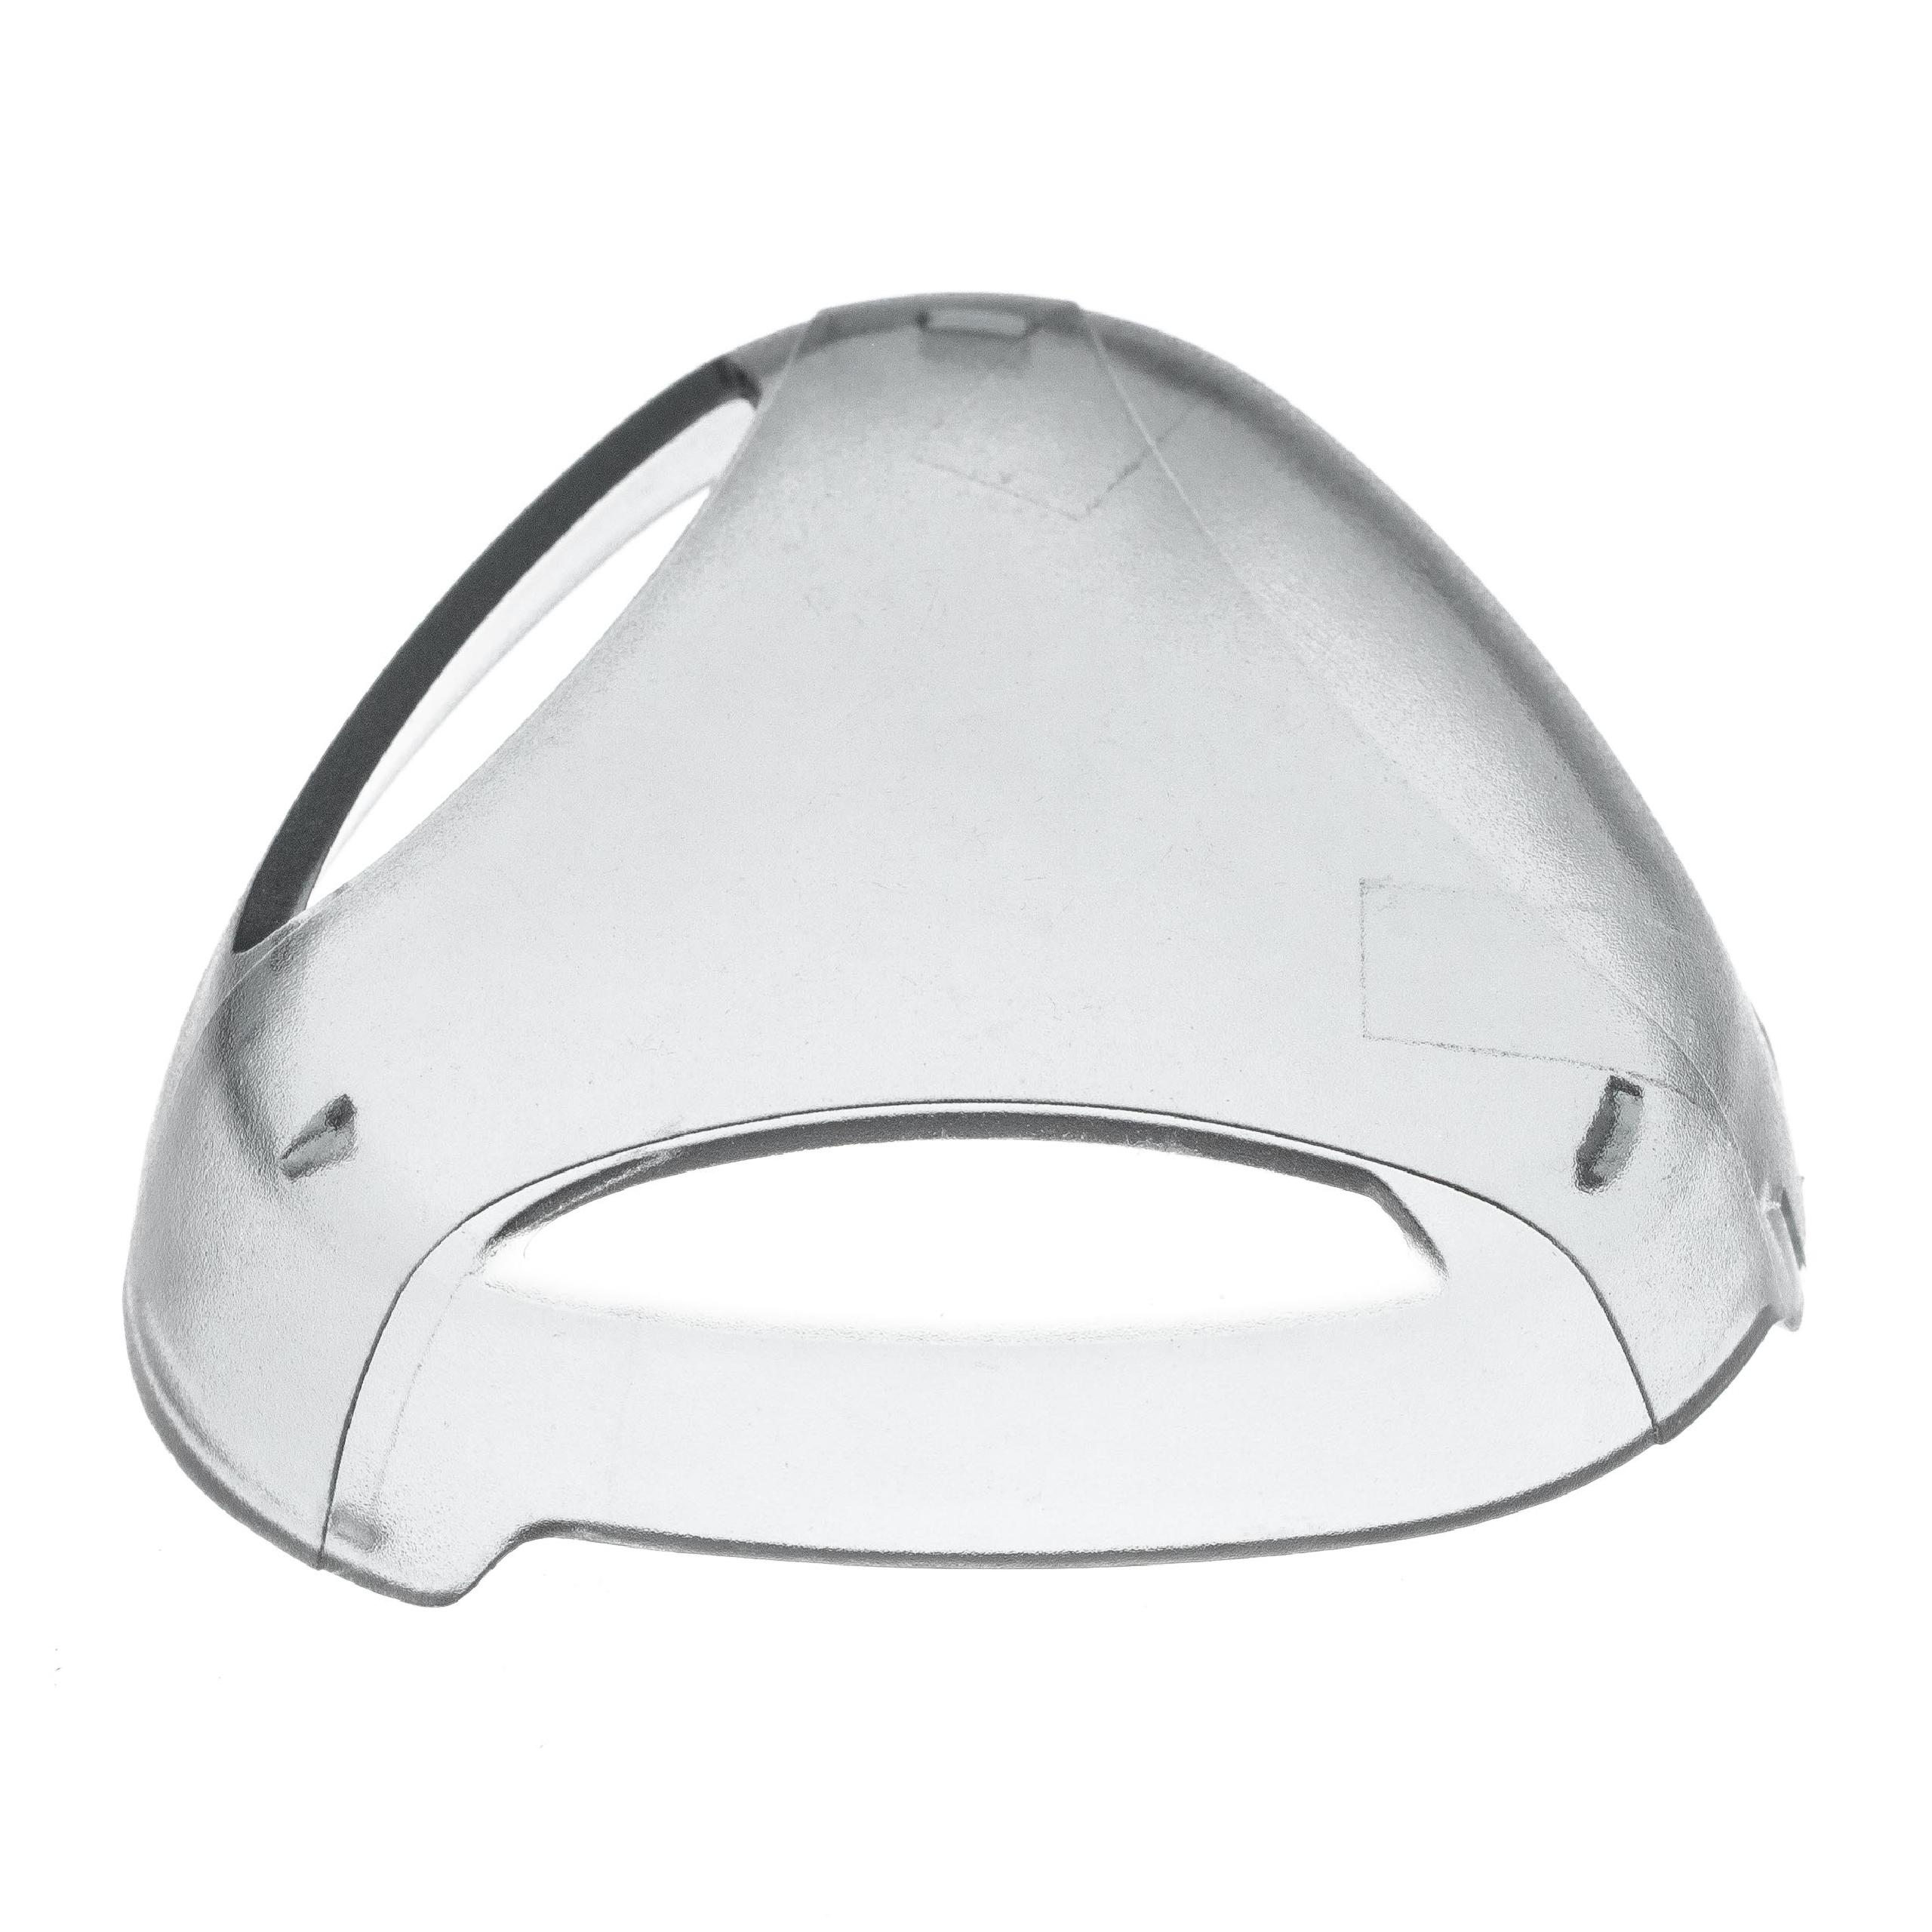 Electric Shaver Protection Cap for Philips AT750 Razor and Others / HQ8, HQ9 Shaver Head